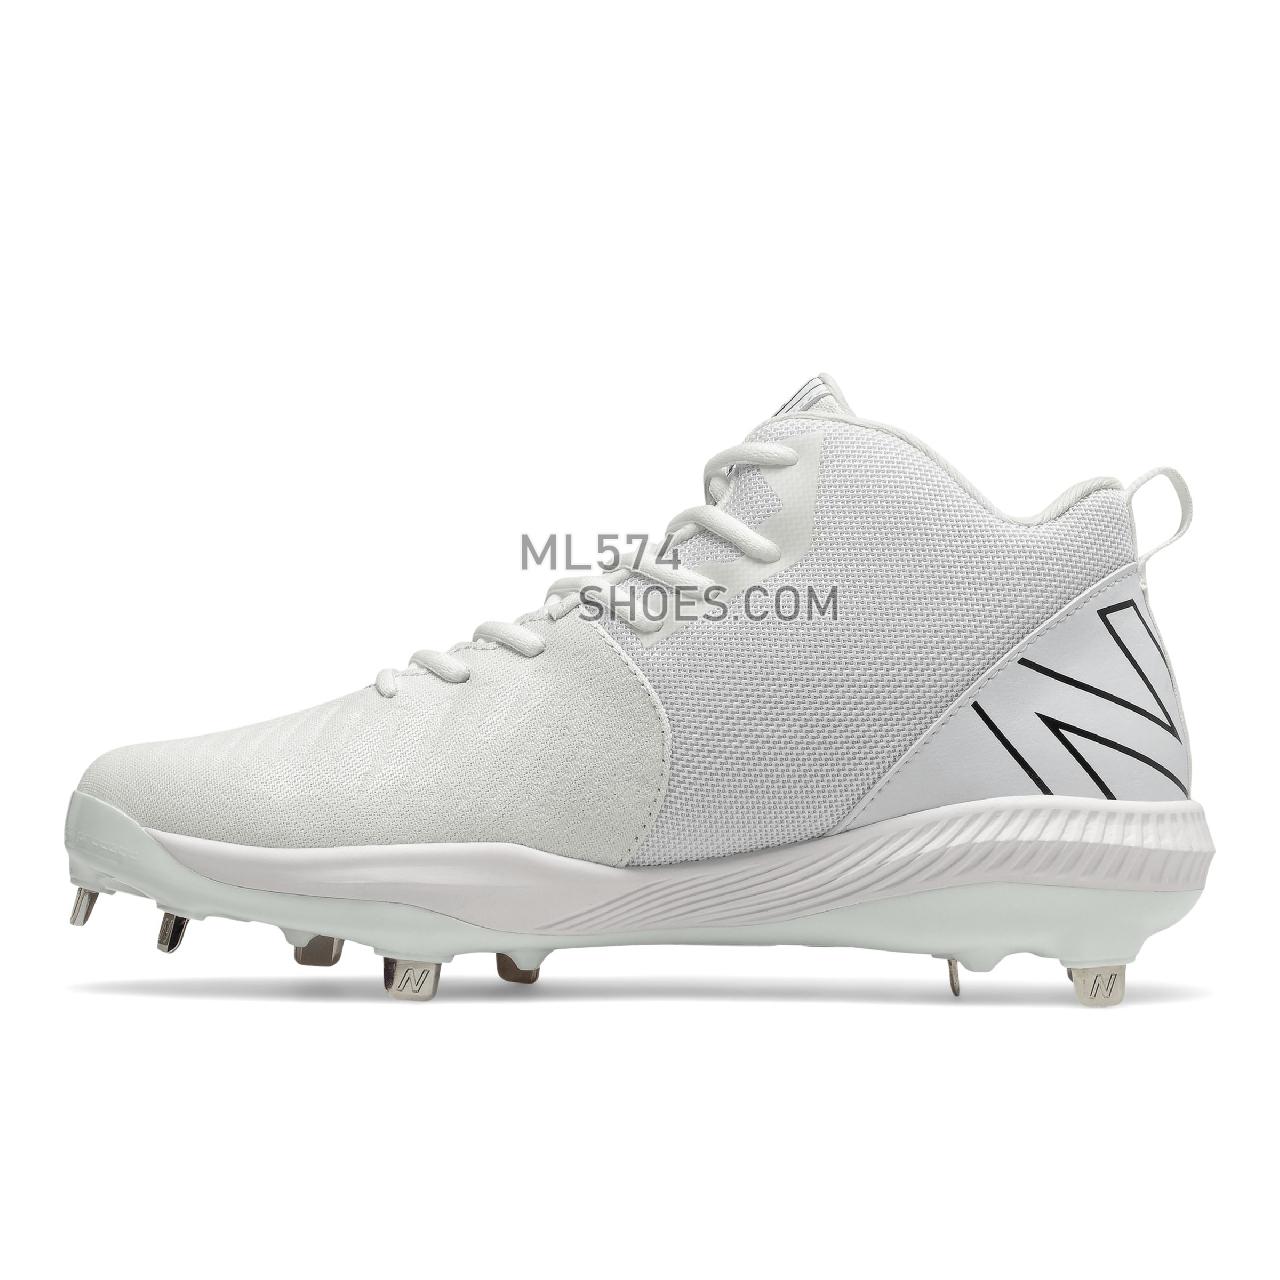 New Balance FuelCell 4040 v6 Mid-Metal - Men's Mid-Cut Baseball Cleats - White with Black - M4040TW6